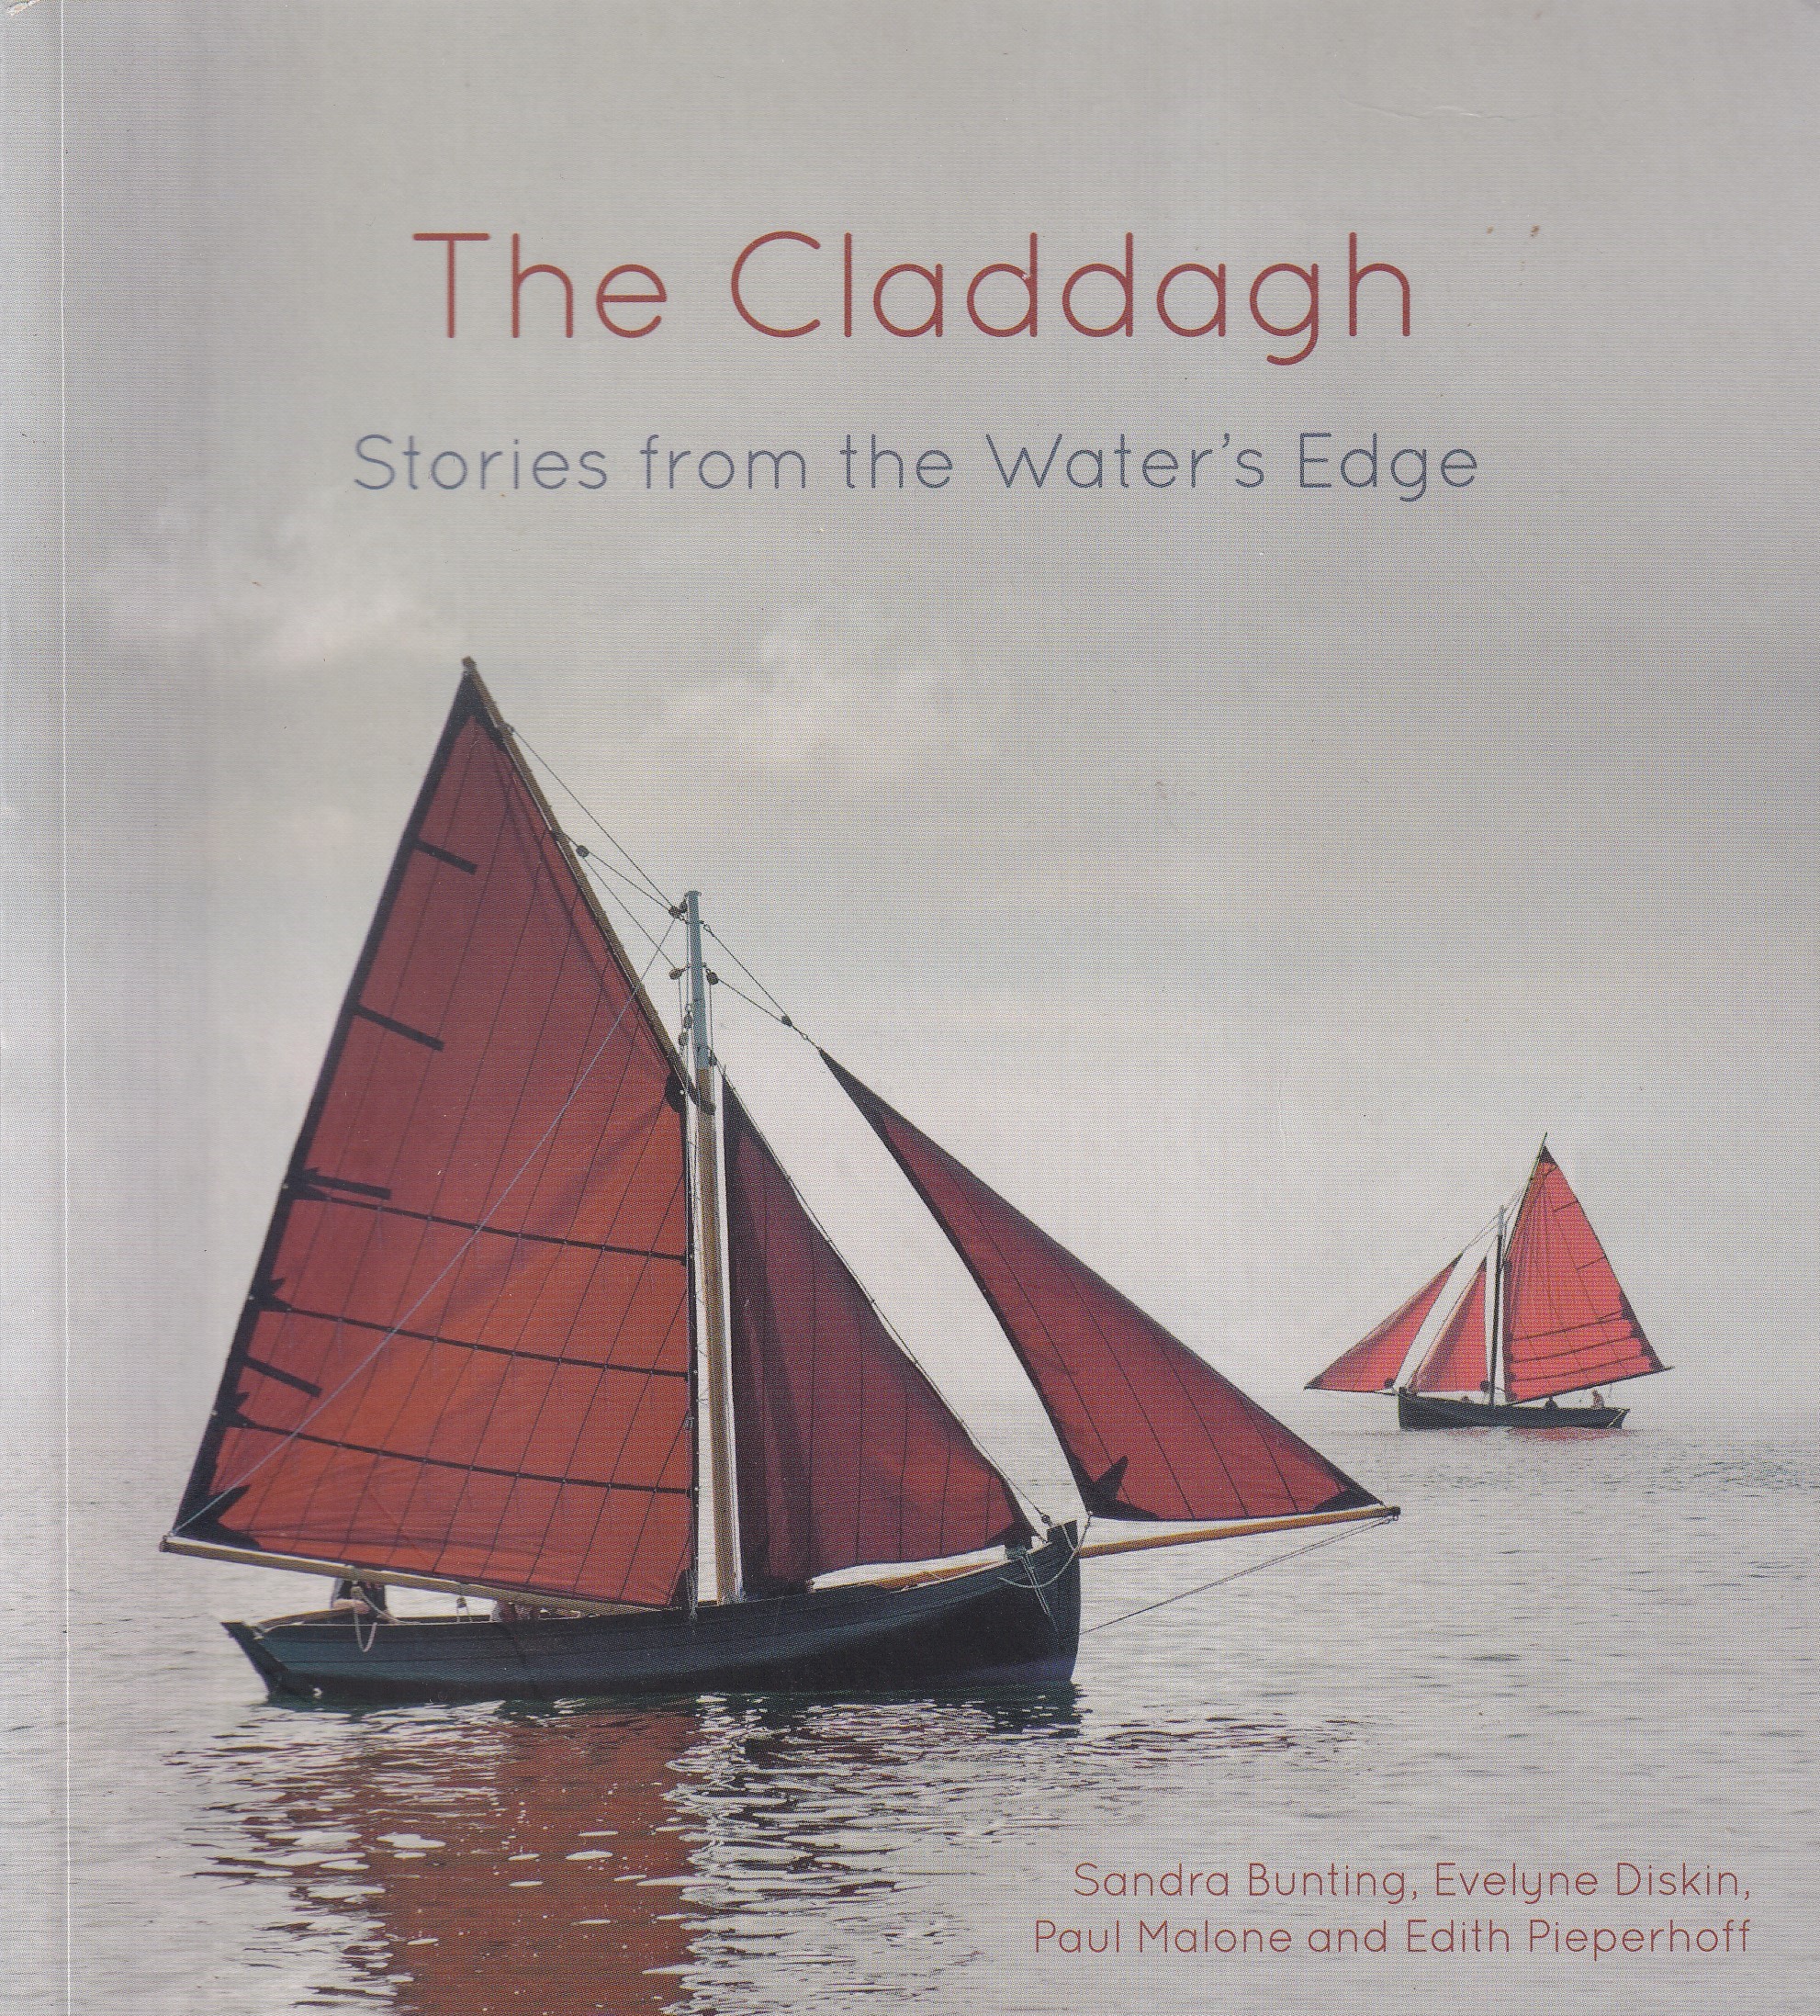 The Claddagh: Stories from the Water’s Edge by Sandra Bunting, Evelyne Diskin, Paul Malone and Edith Pieperhoff